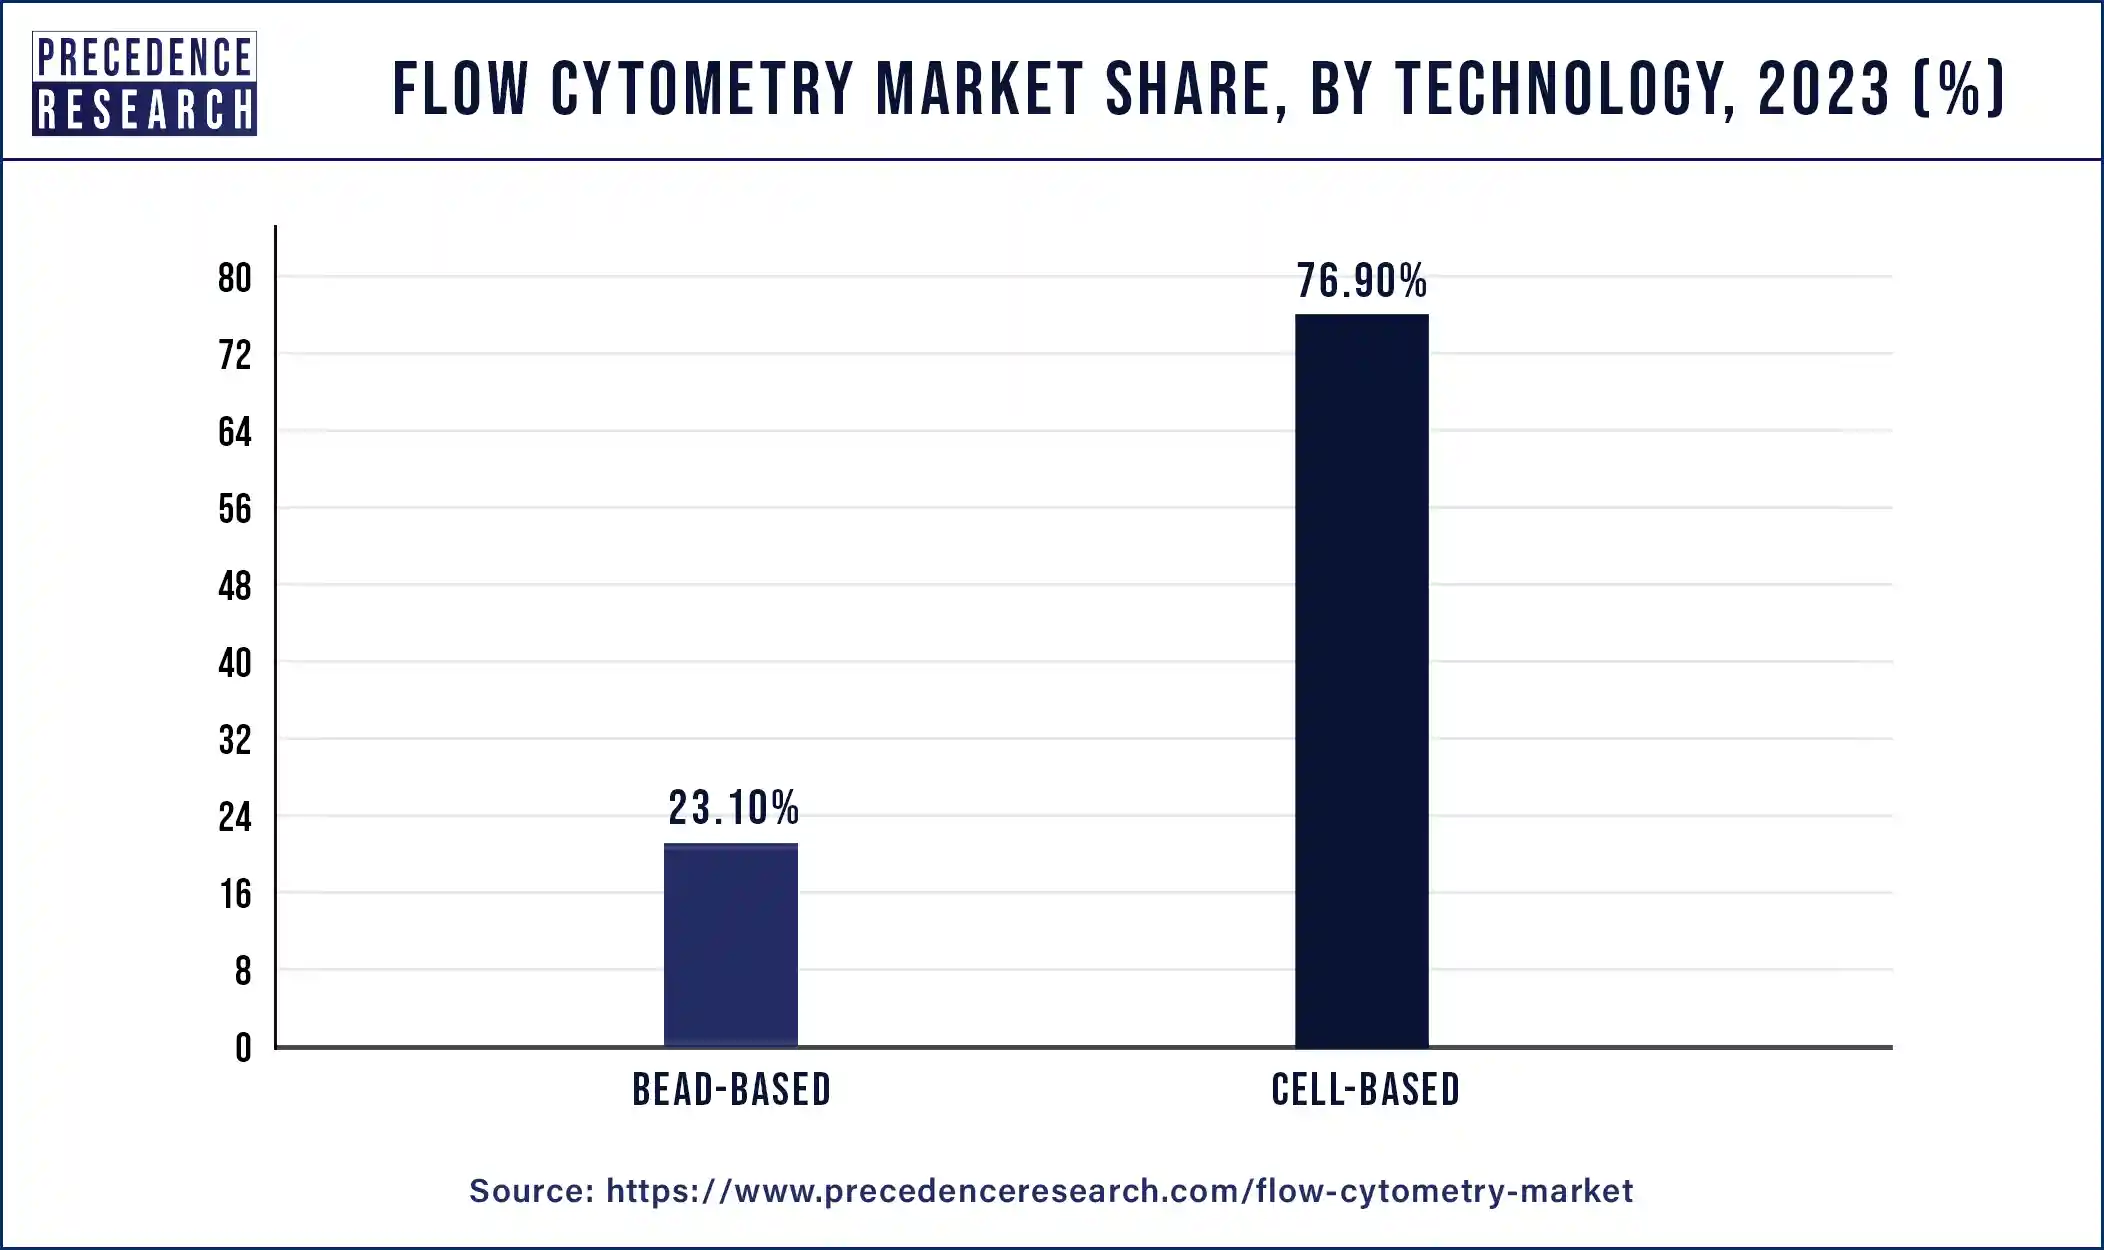 Flow Cytometry Market Share, By Technology, 2023 (%)